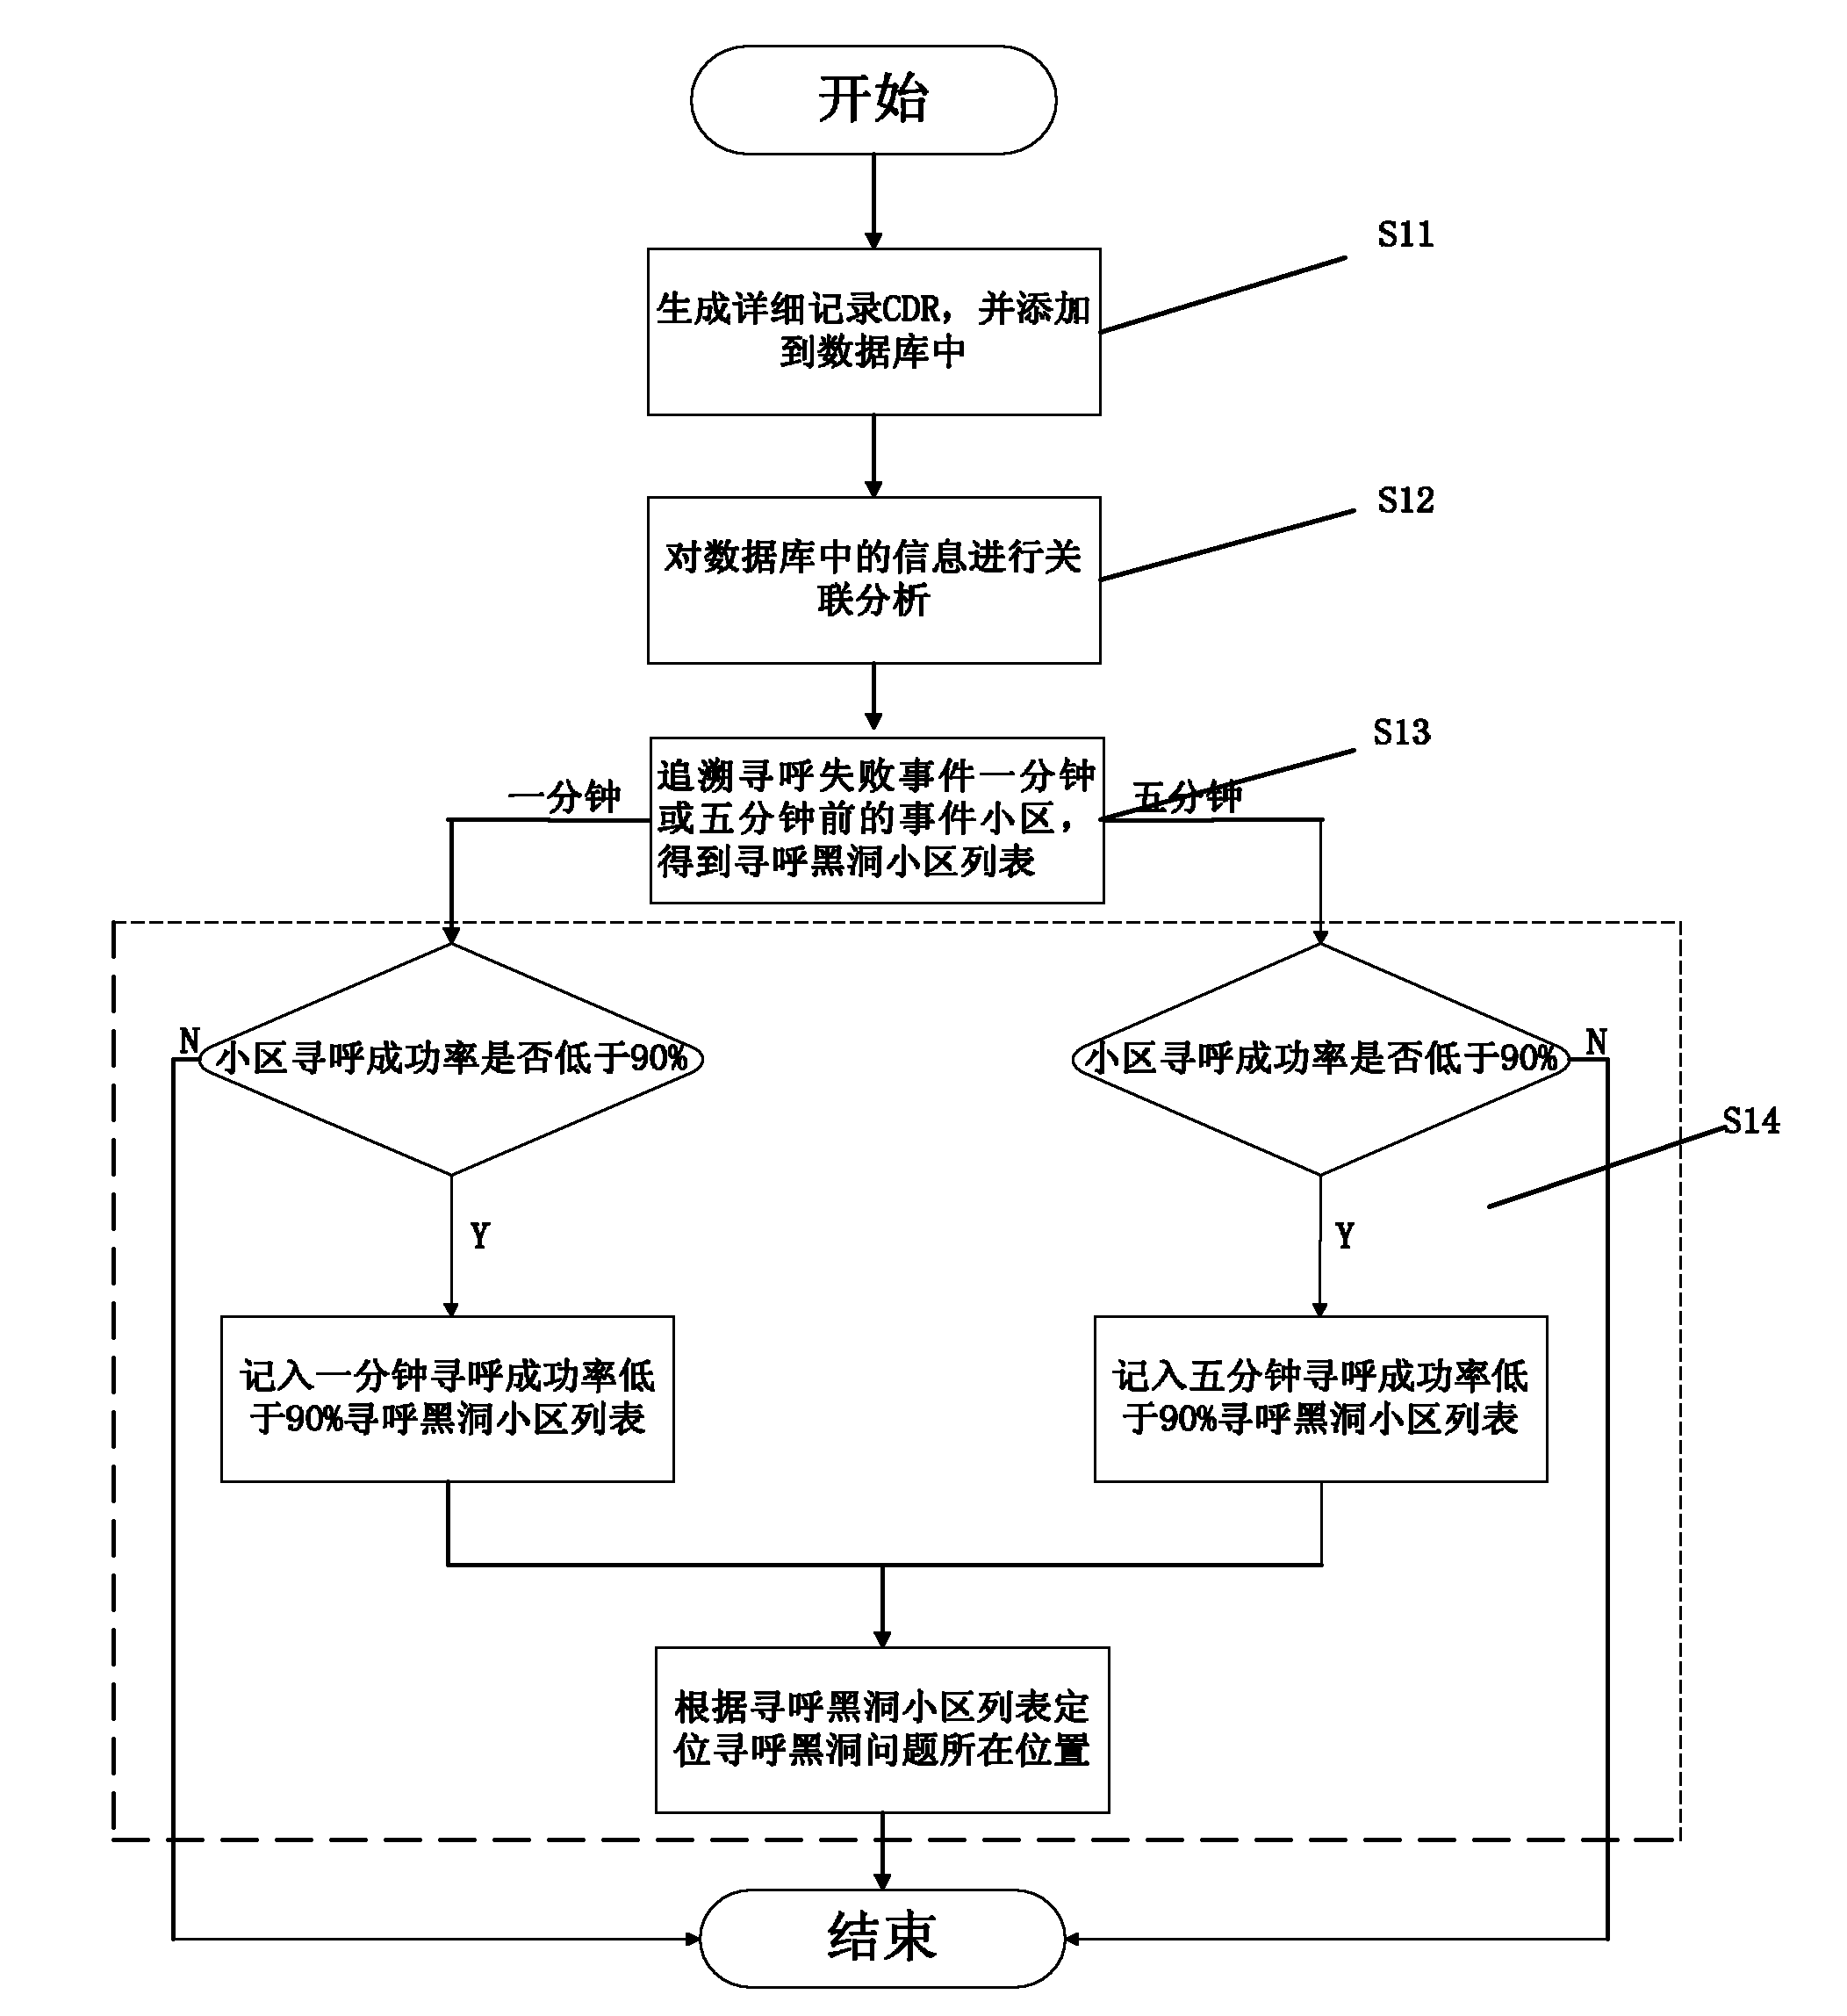 Paging black hole cell locating method based on signaling of interface A